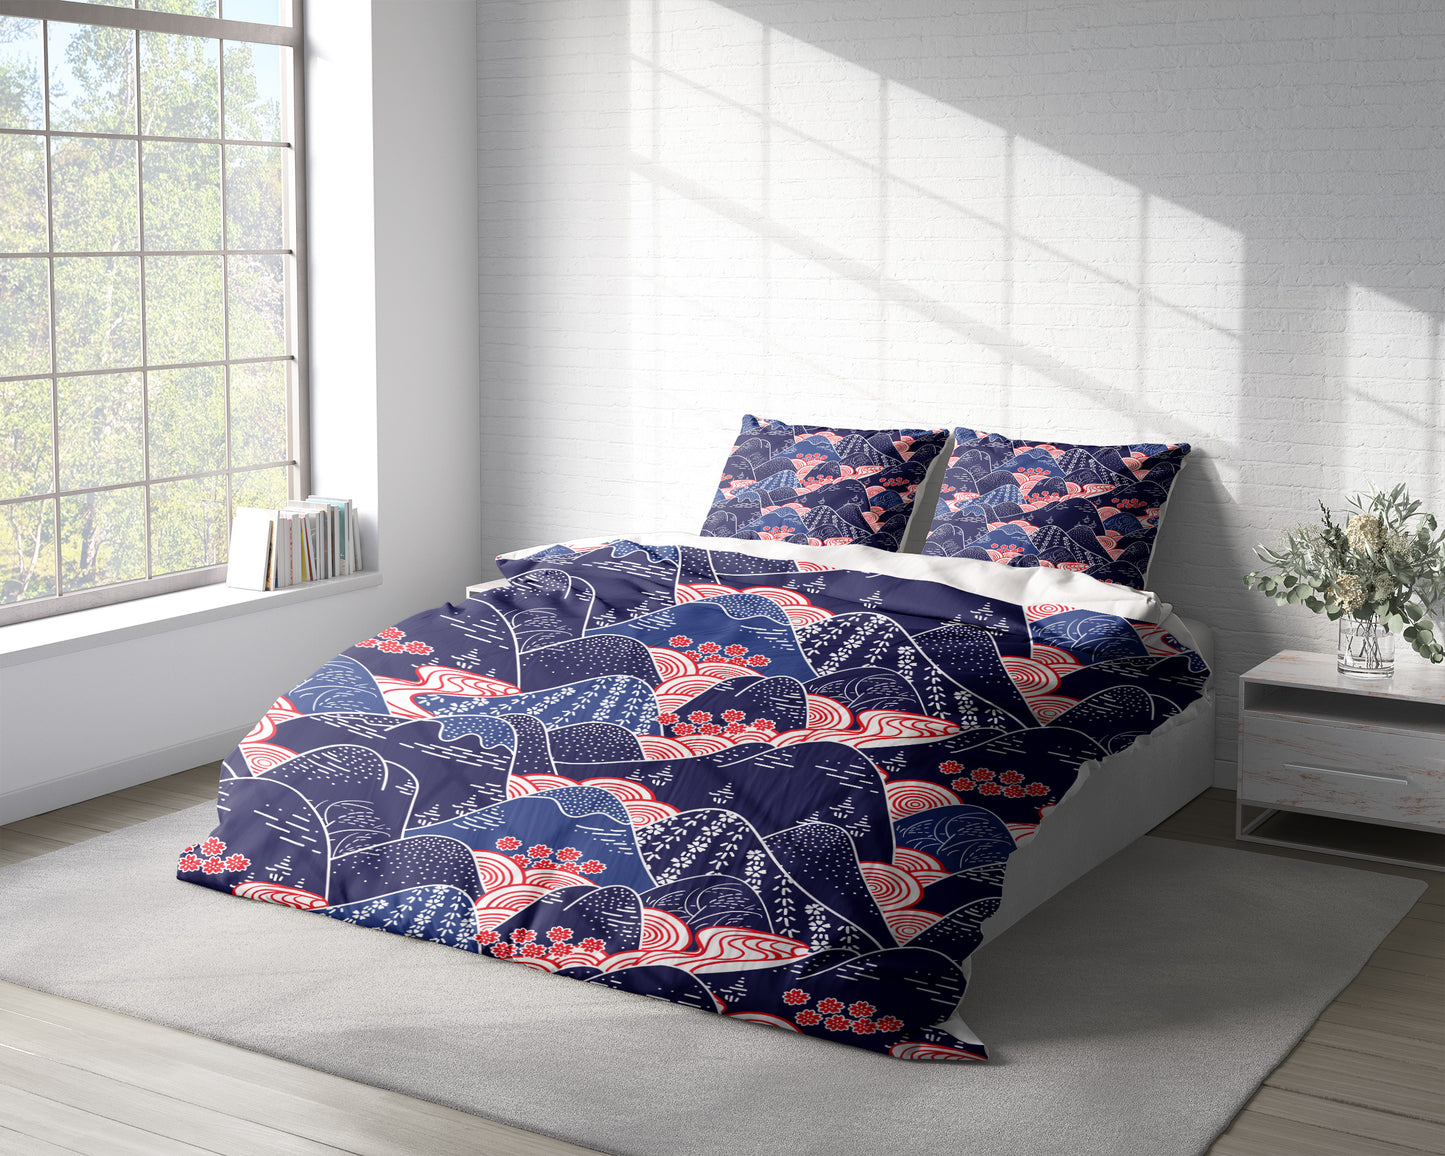 Japanese Kimono Flower Duvet Cover Set w Pillowcases, Blue Mountain Chinoiserie 3D Quilt Cover, 3pc Single Double Queen King Size Doona Cover